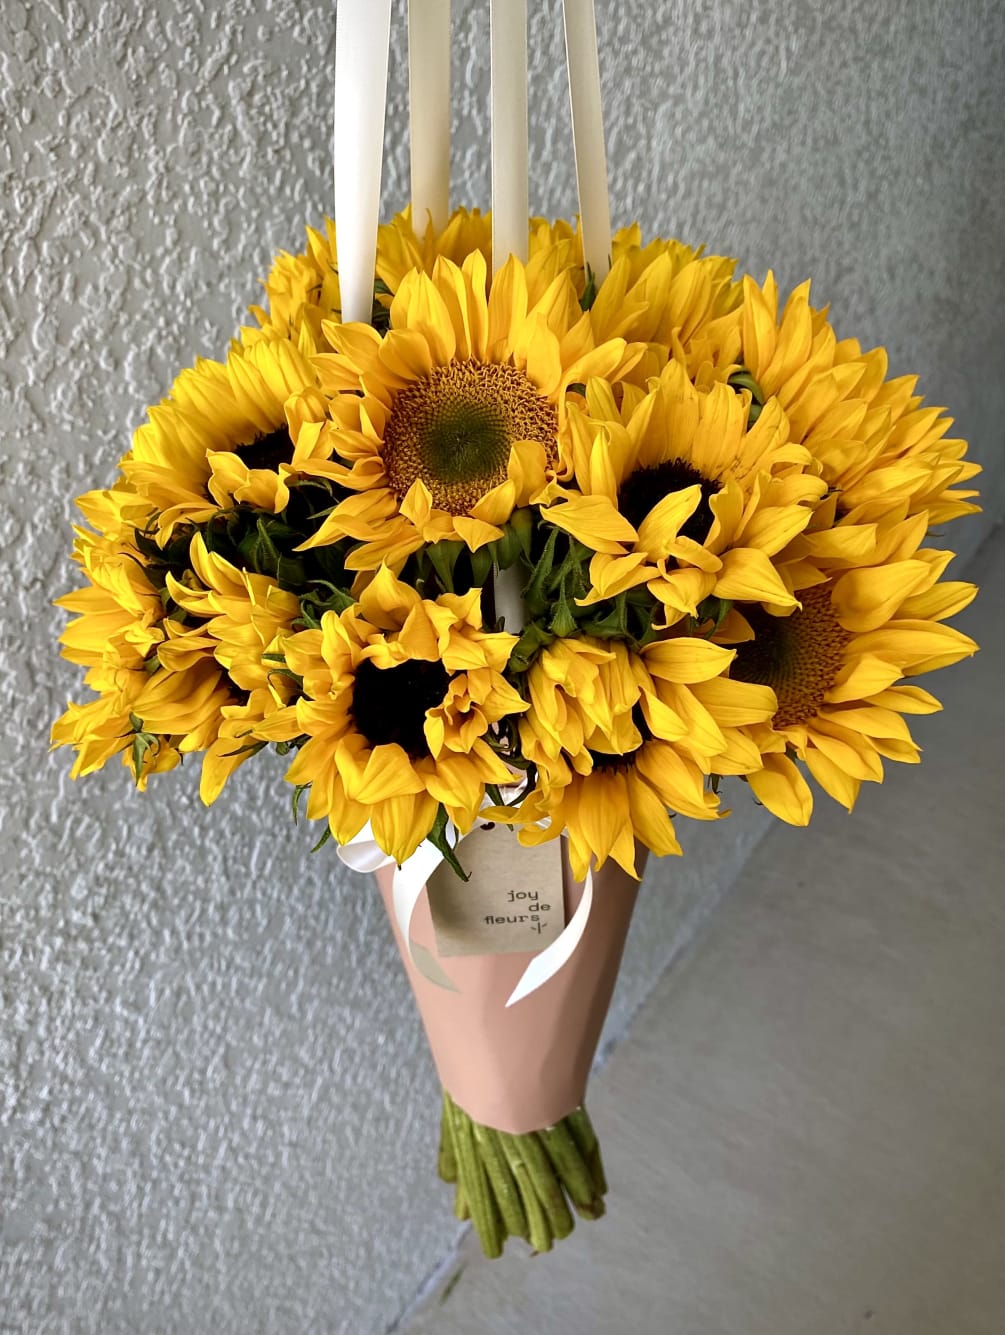 Make a bold statement with this elegantly simple design. Approximately 15-20 Sunflowers